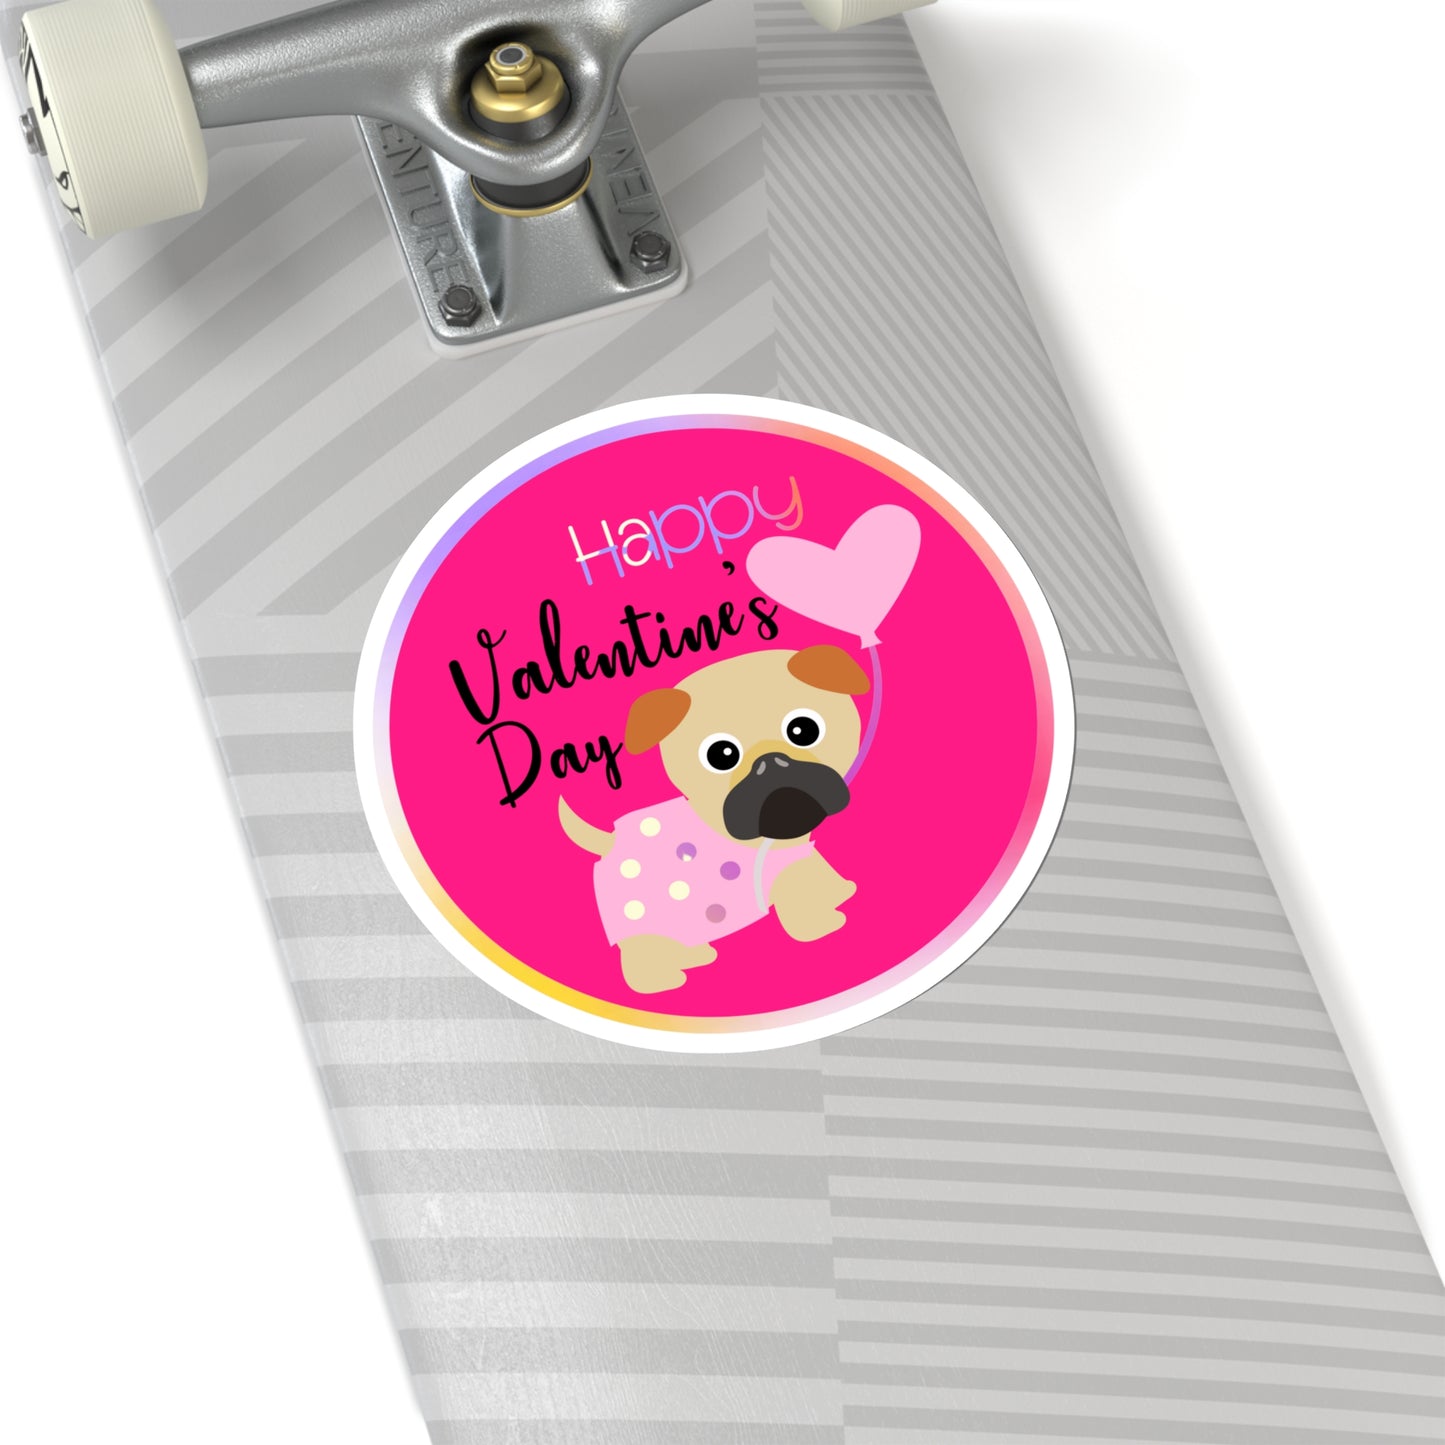 Lovely Kiss-Cut Stickers Valentines Day Cute Puppy Decorative Stickers for cards, Scrapbooks, gift tags, or on their own